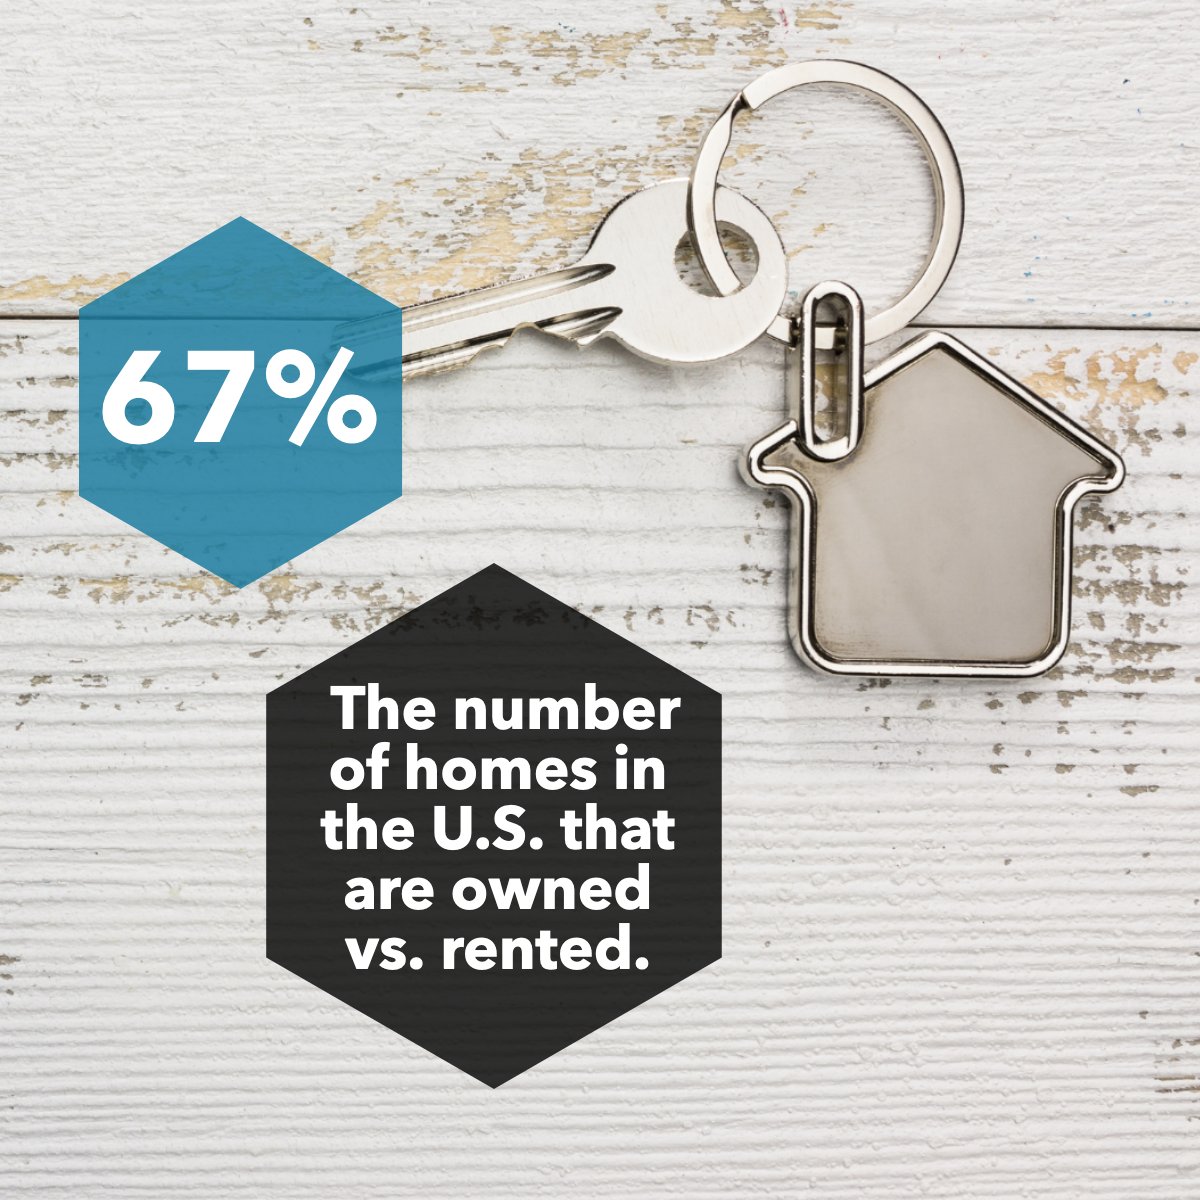 Did you know the amount of owned vs. rented houses in the US? 🤔 #homebuyer #owning #renting #didyouknow #realestatefacts #homeowner #facts #cherylcitro